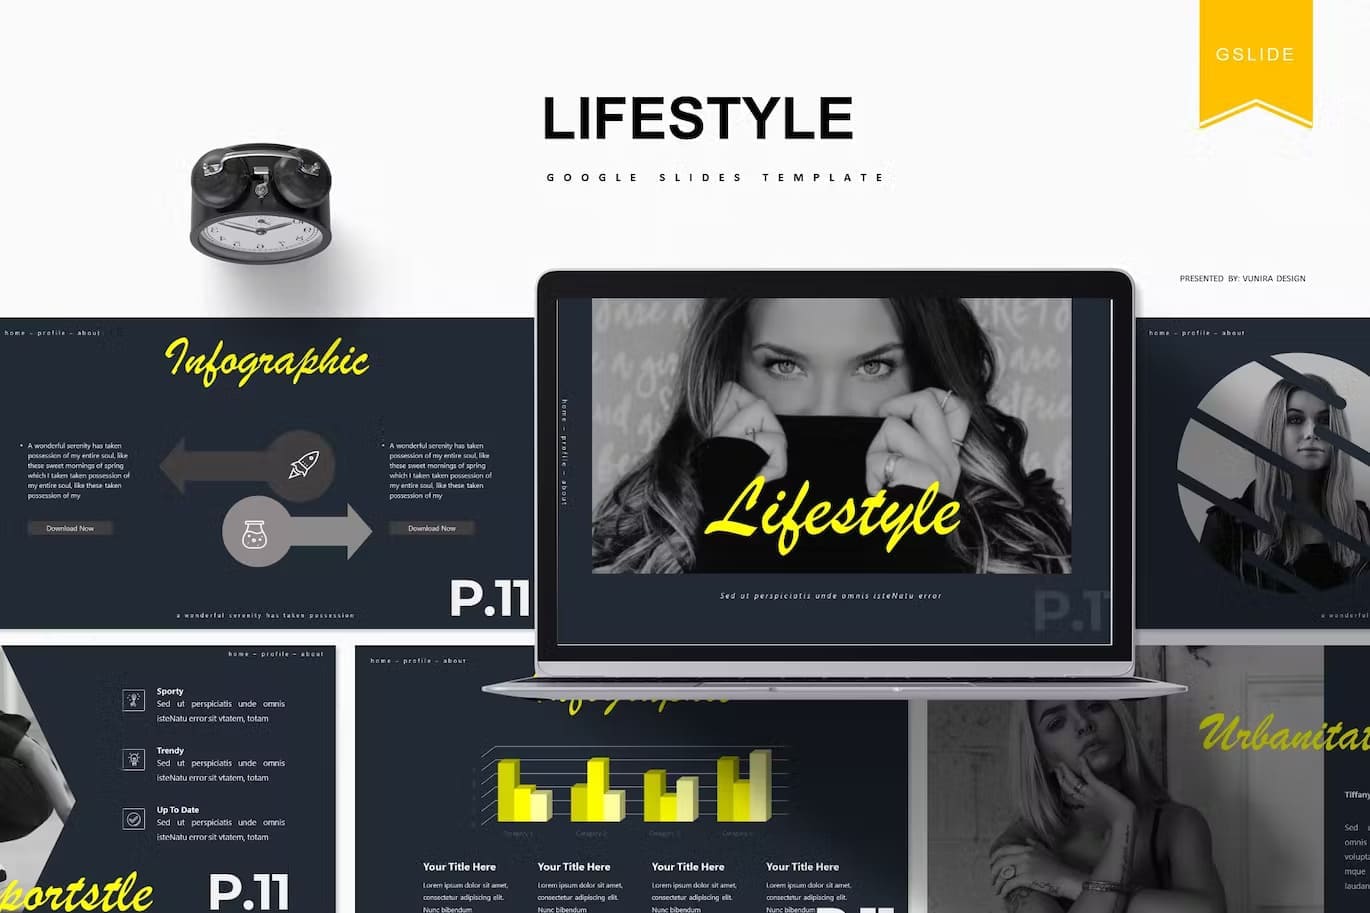 Freestyles of Lifestyle | Google Slides Template.